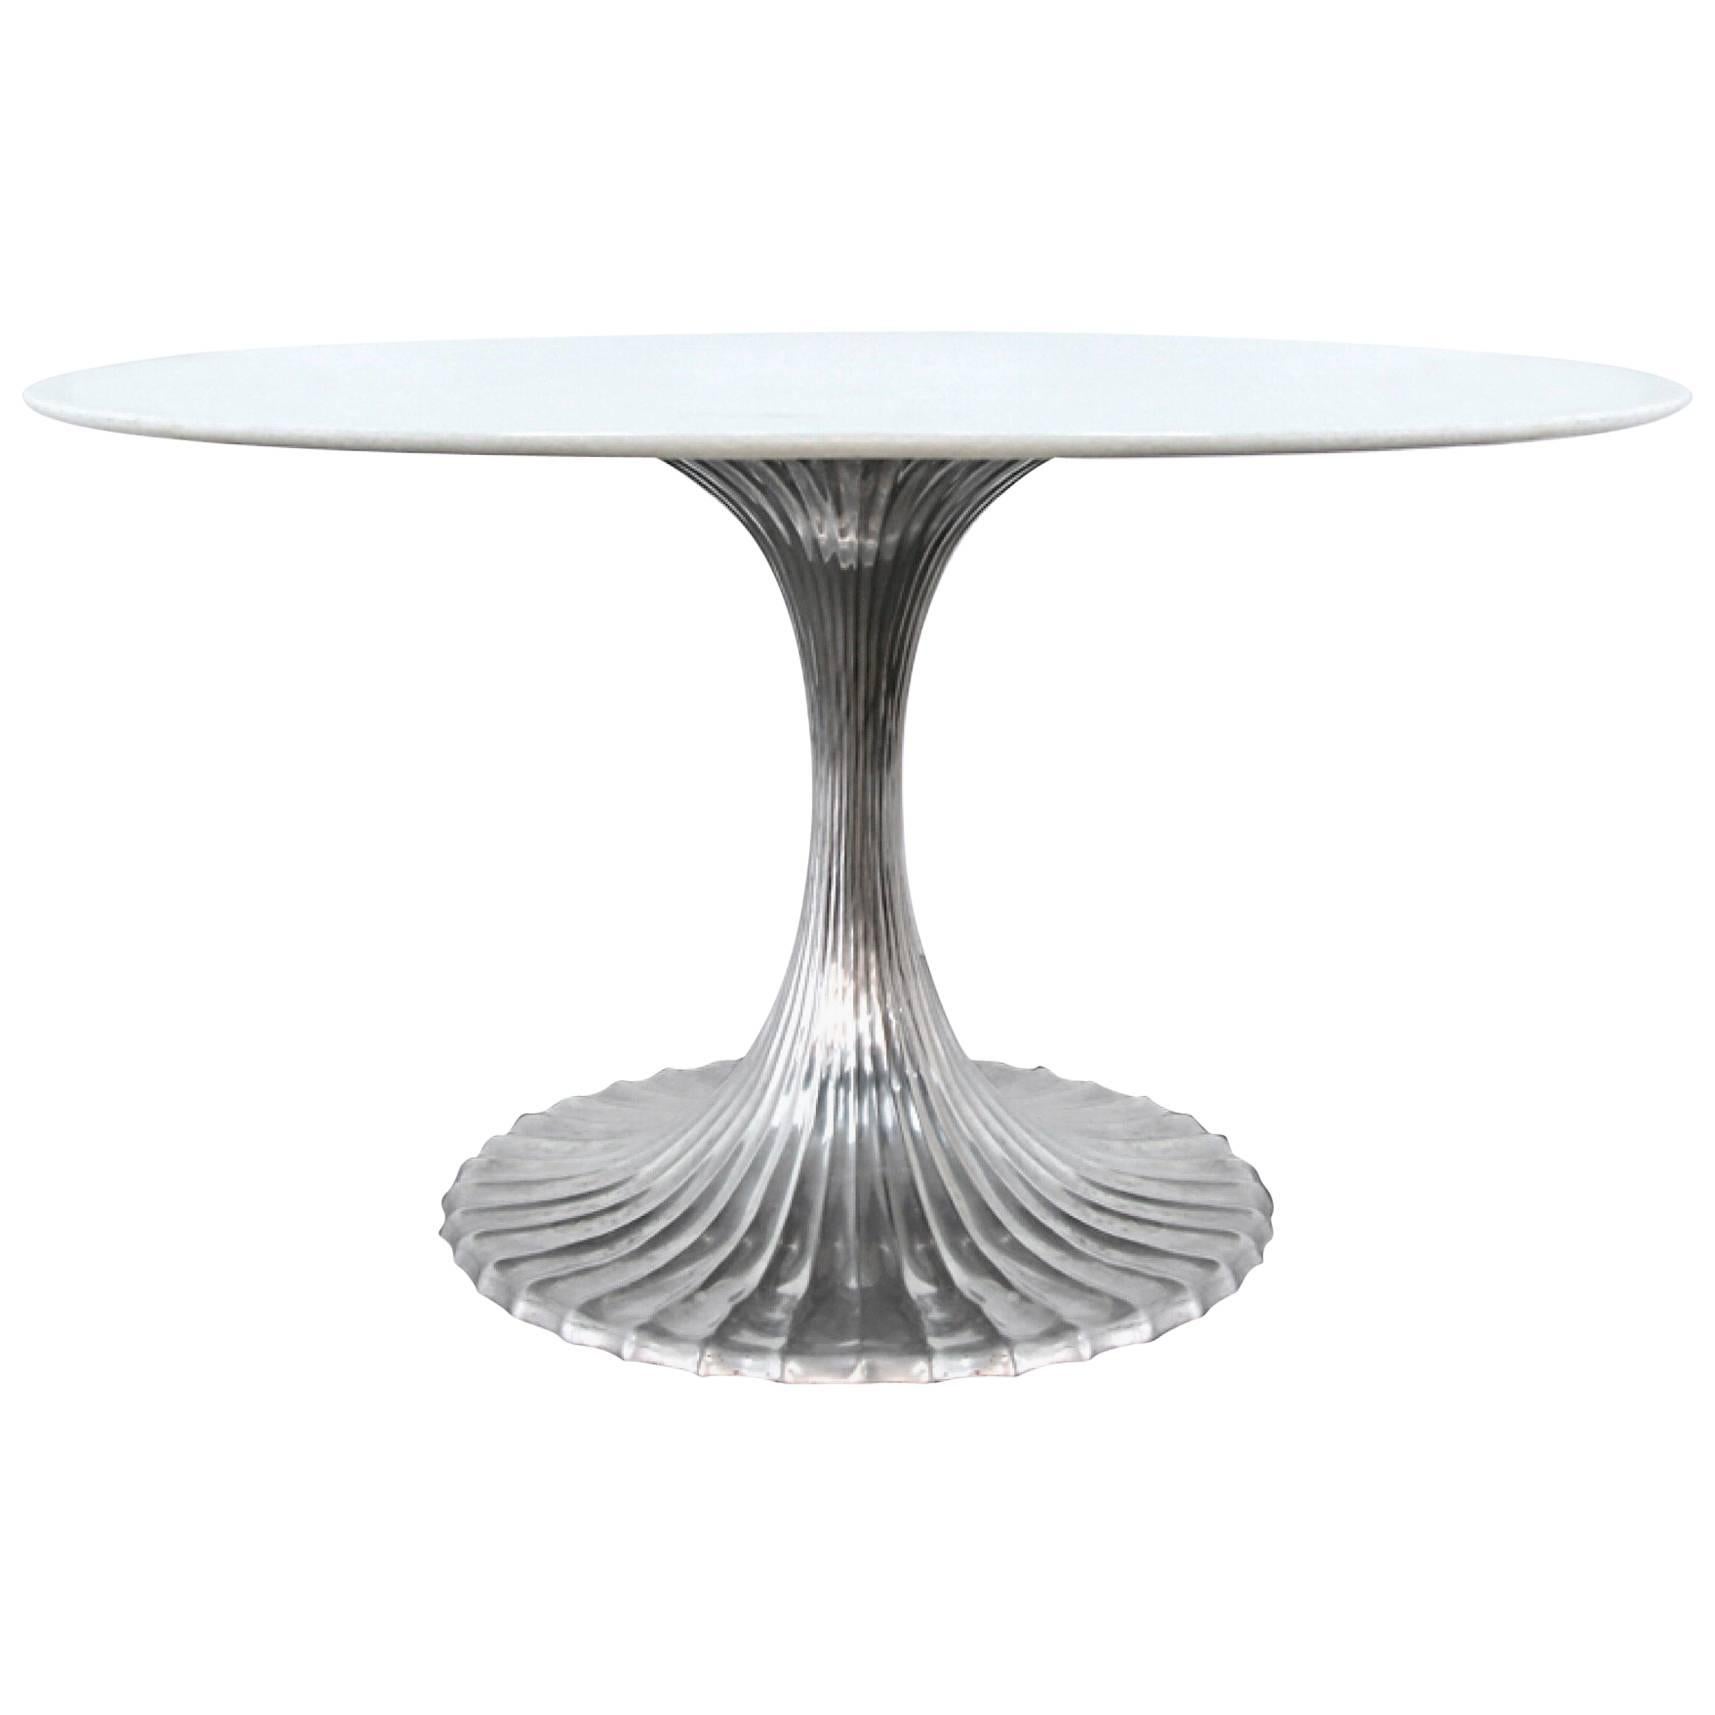 Rare Midcentury Round Table with Unique Fluted Silver Metal Base